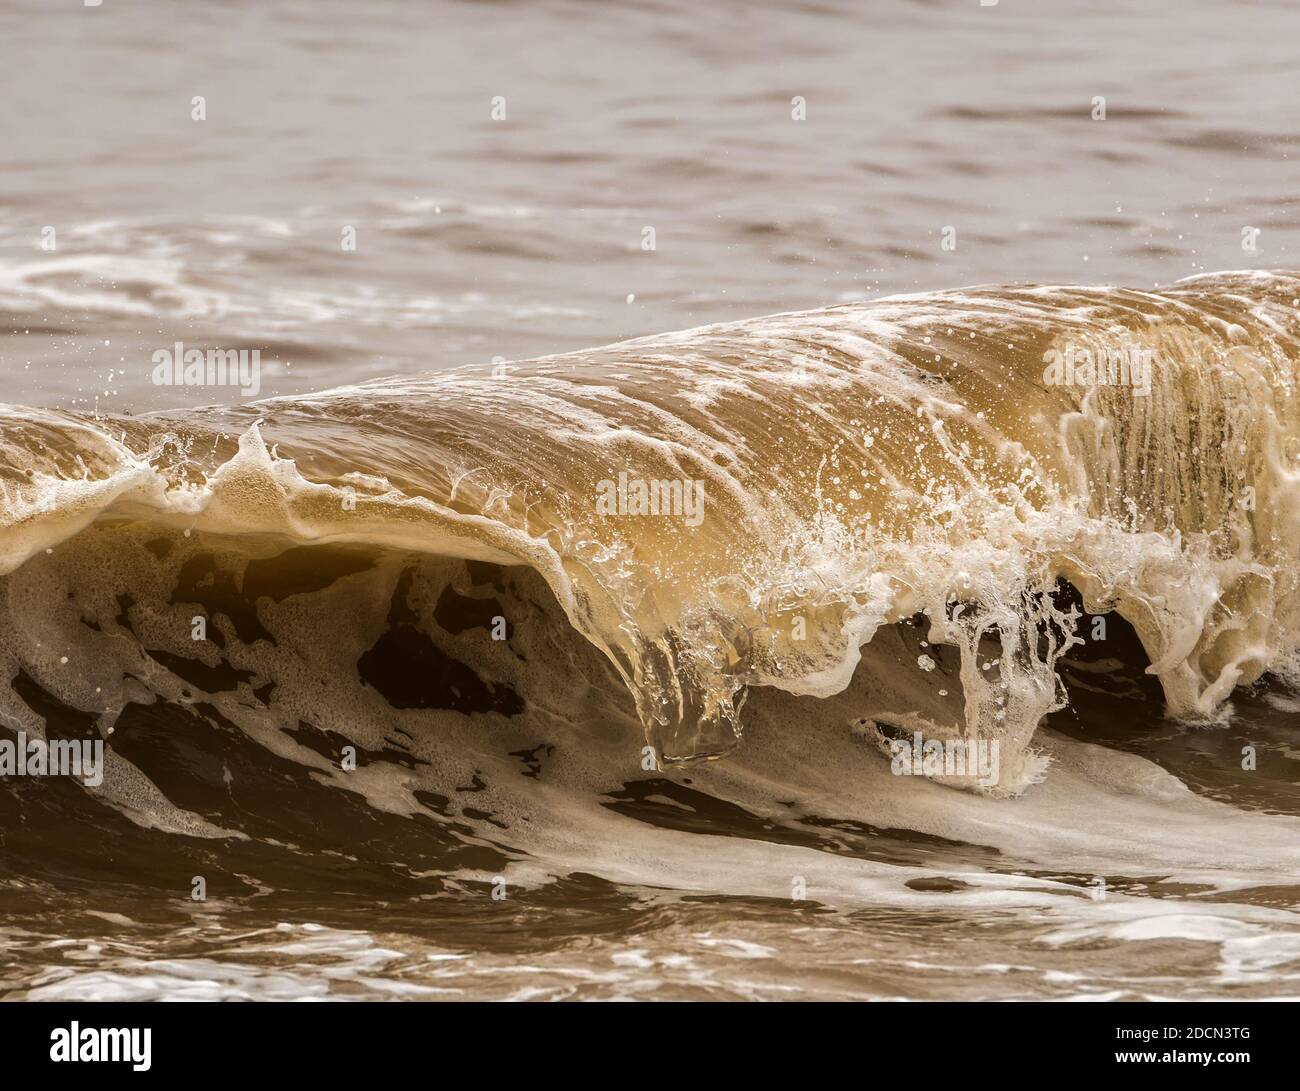 Photo of small breaking wave. The photo was taken with a fast shutter speed to freeze the action. There is lots of detail, and small bubbles. Stock Photo